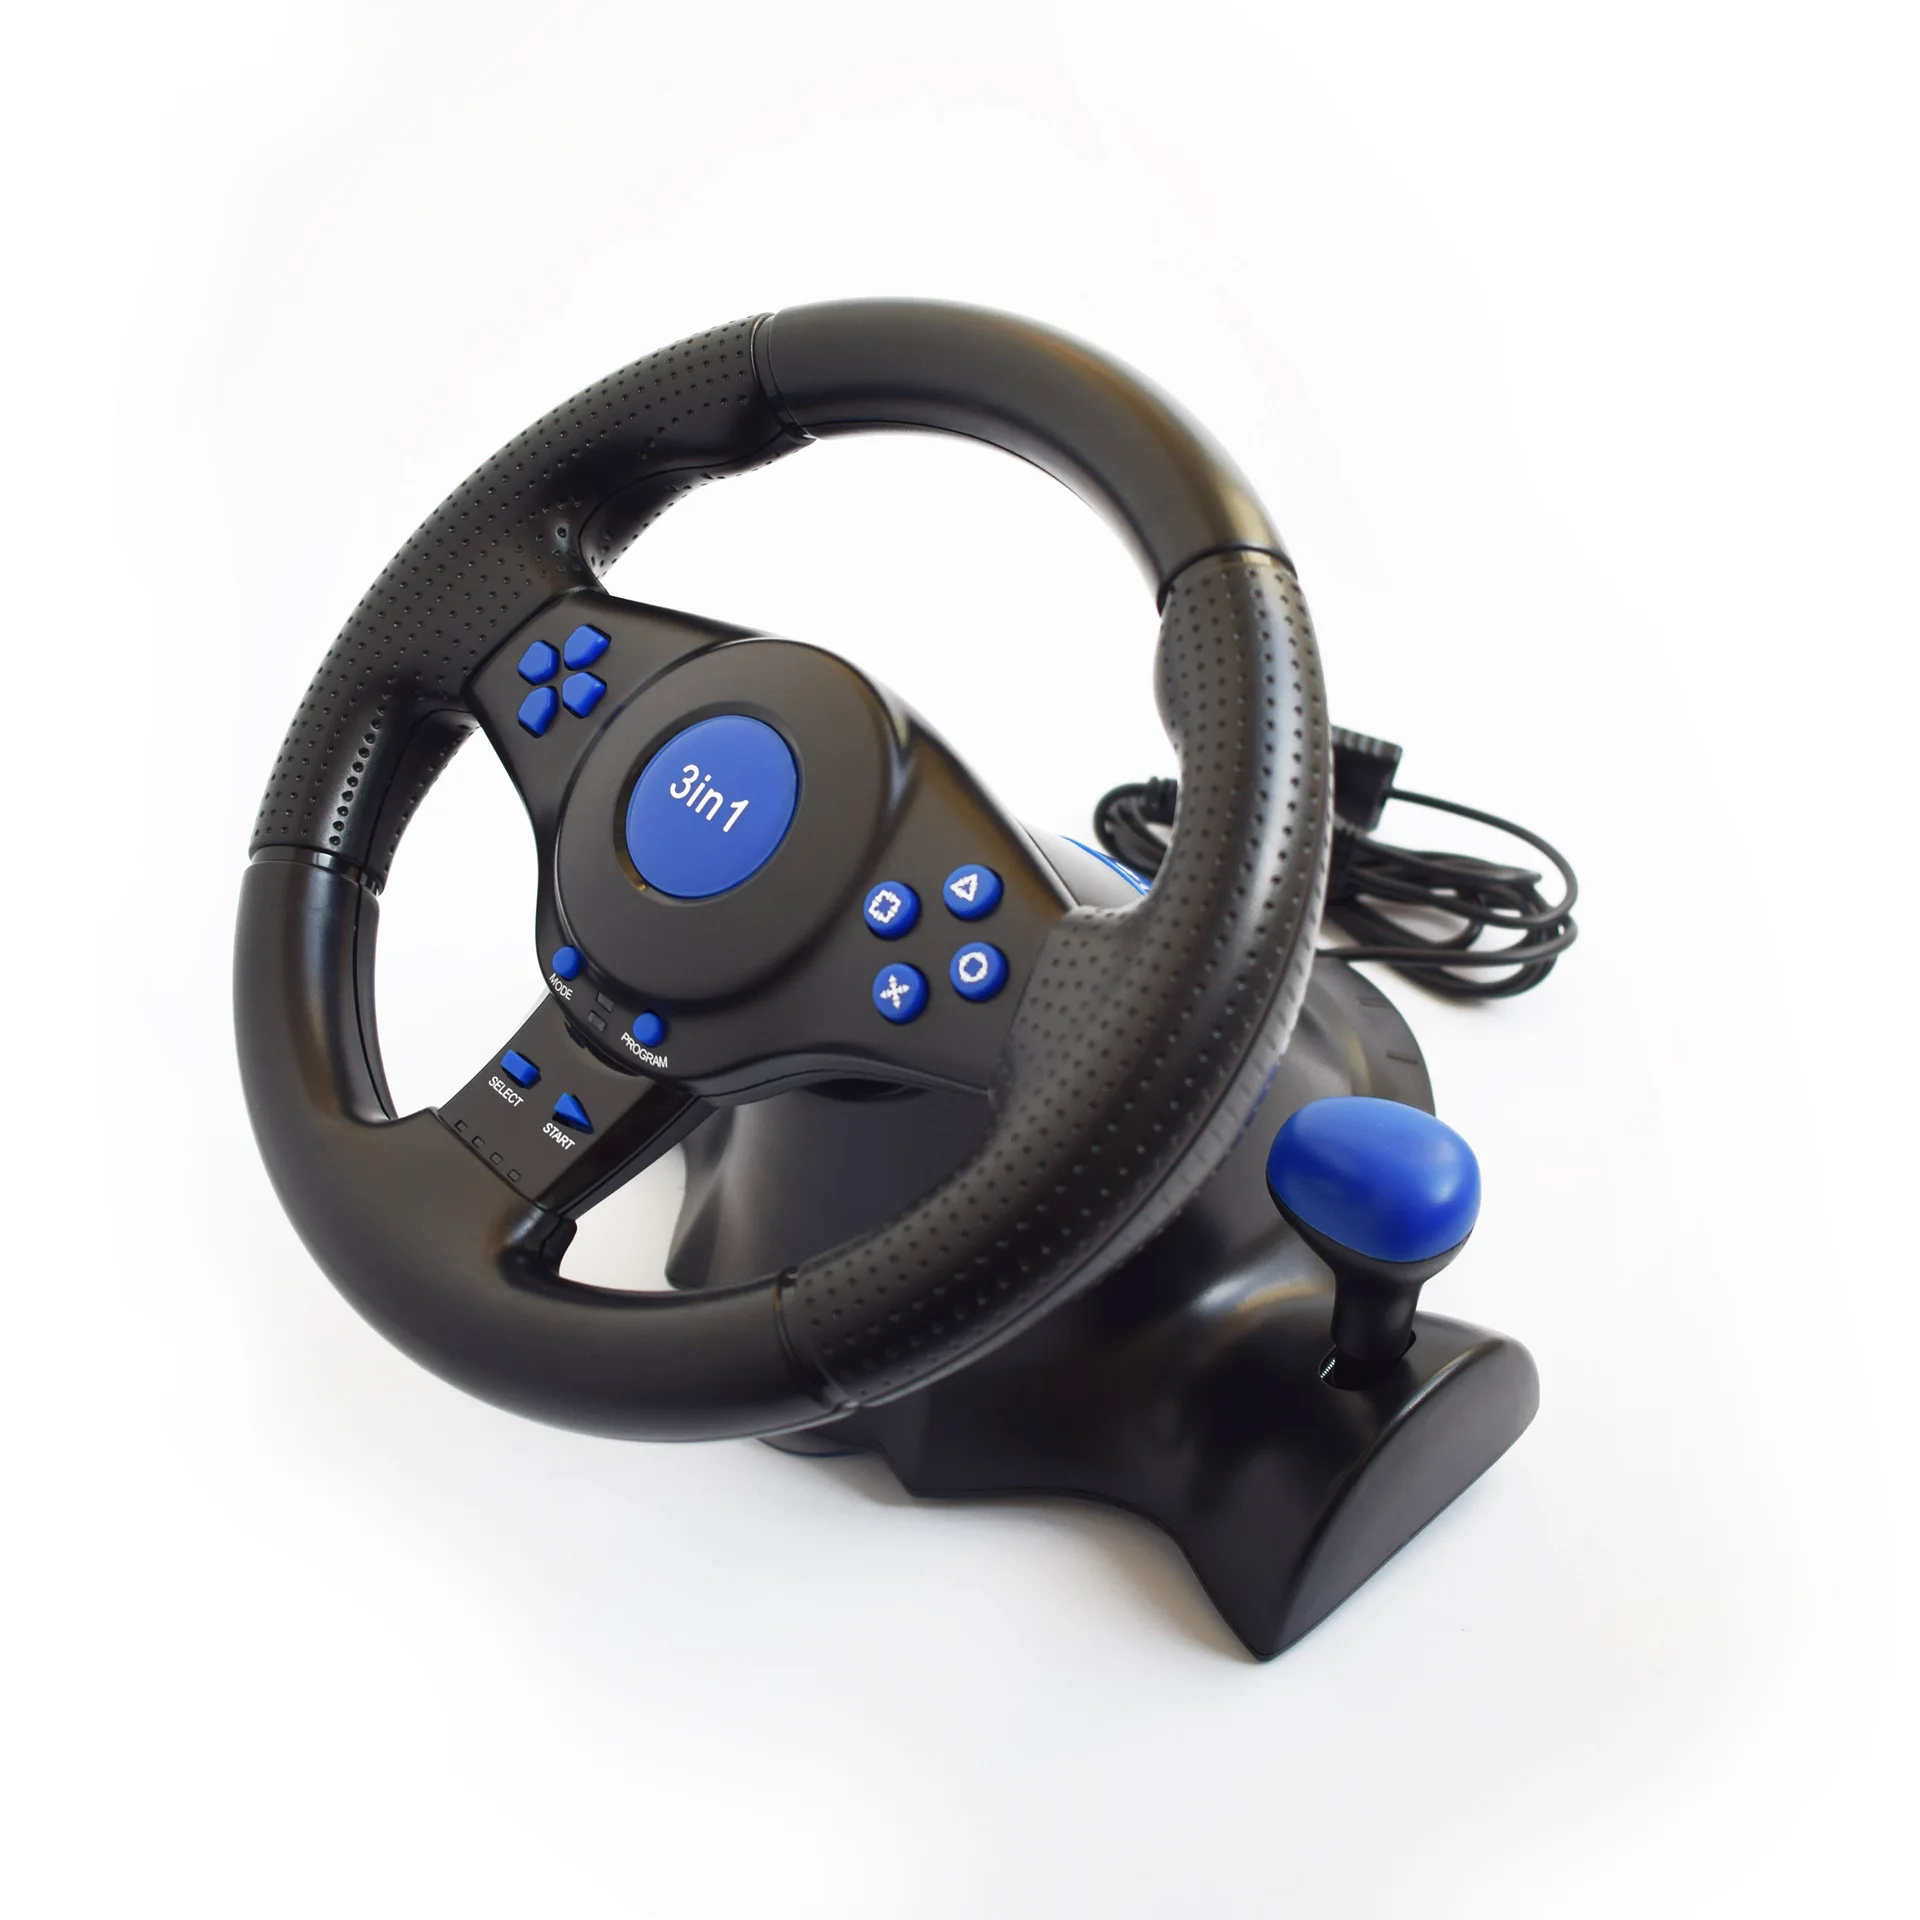 3 In1 Game Steering wheel For ps2 ps3 pc on